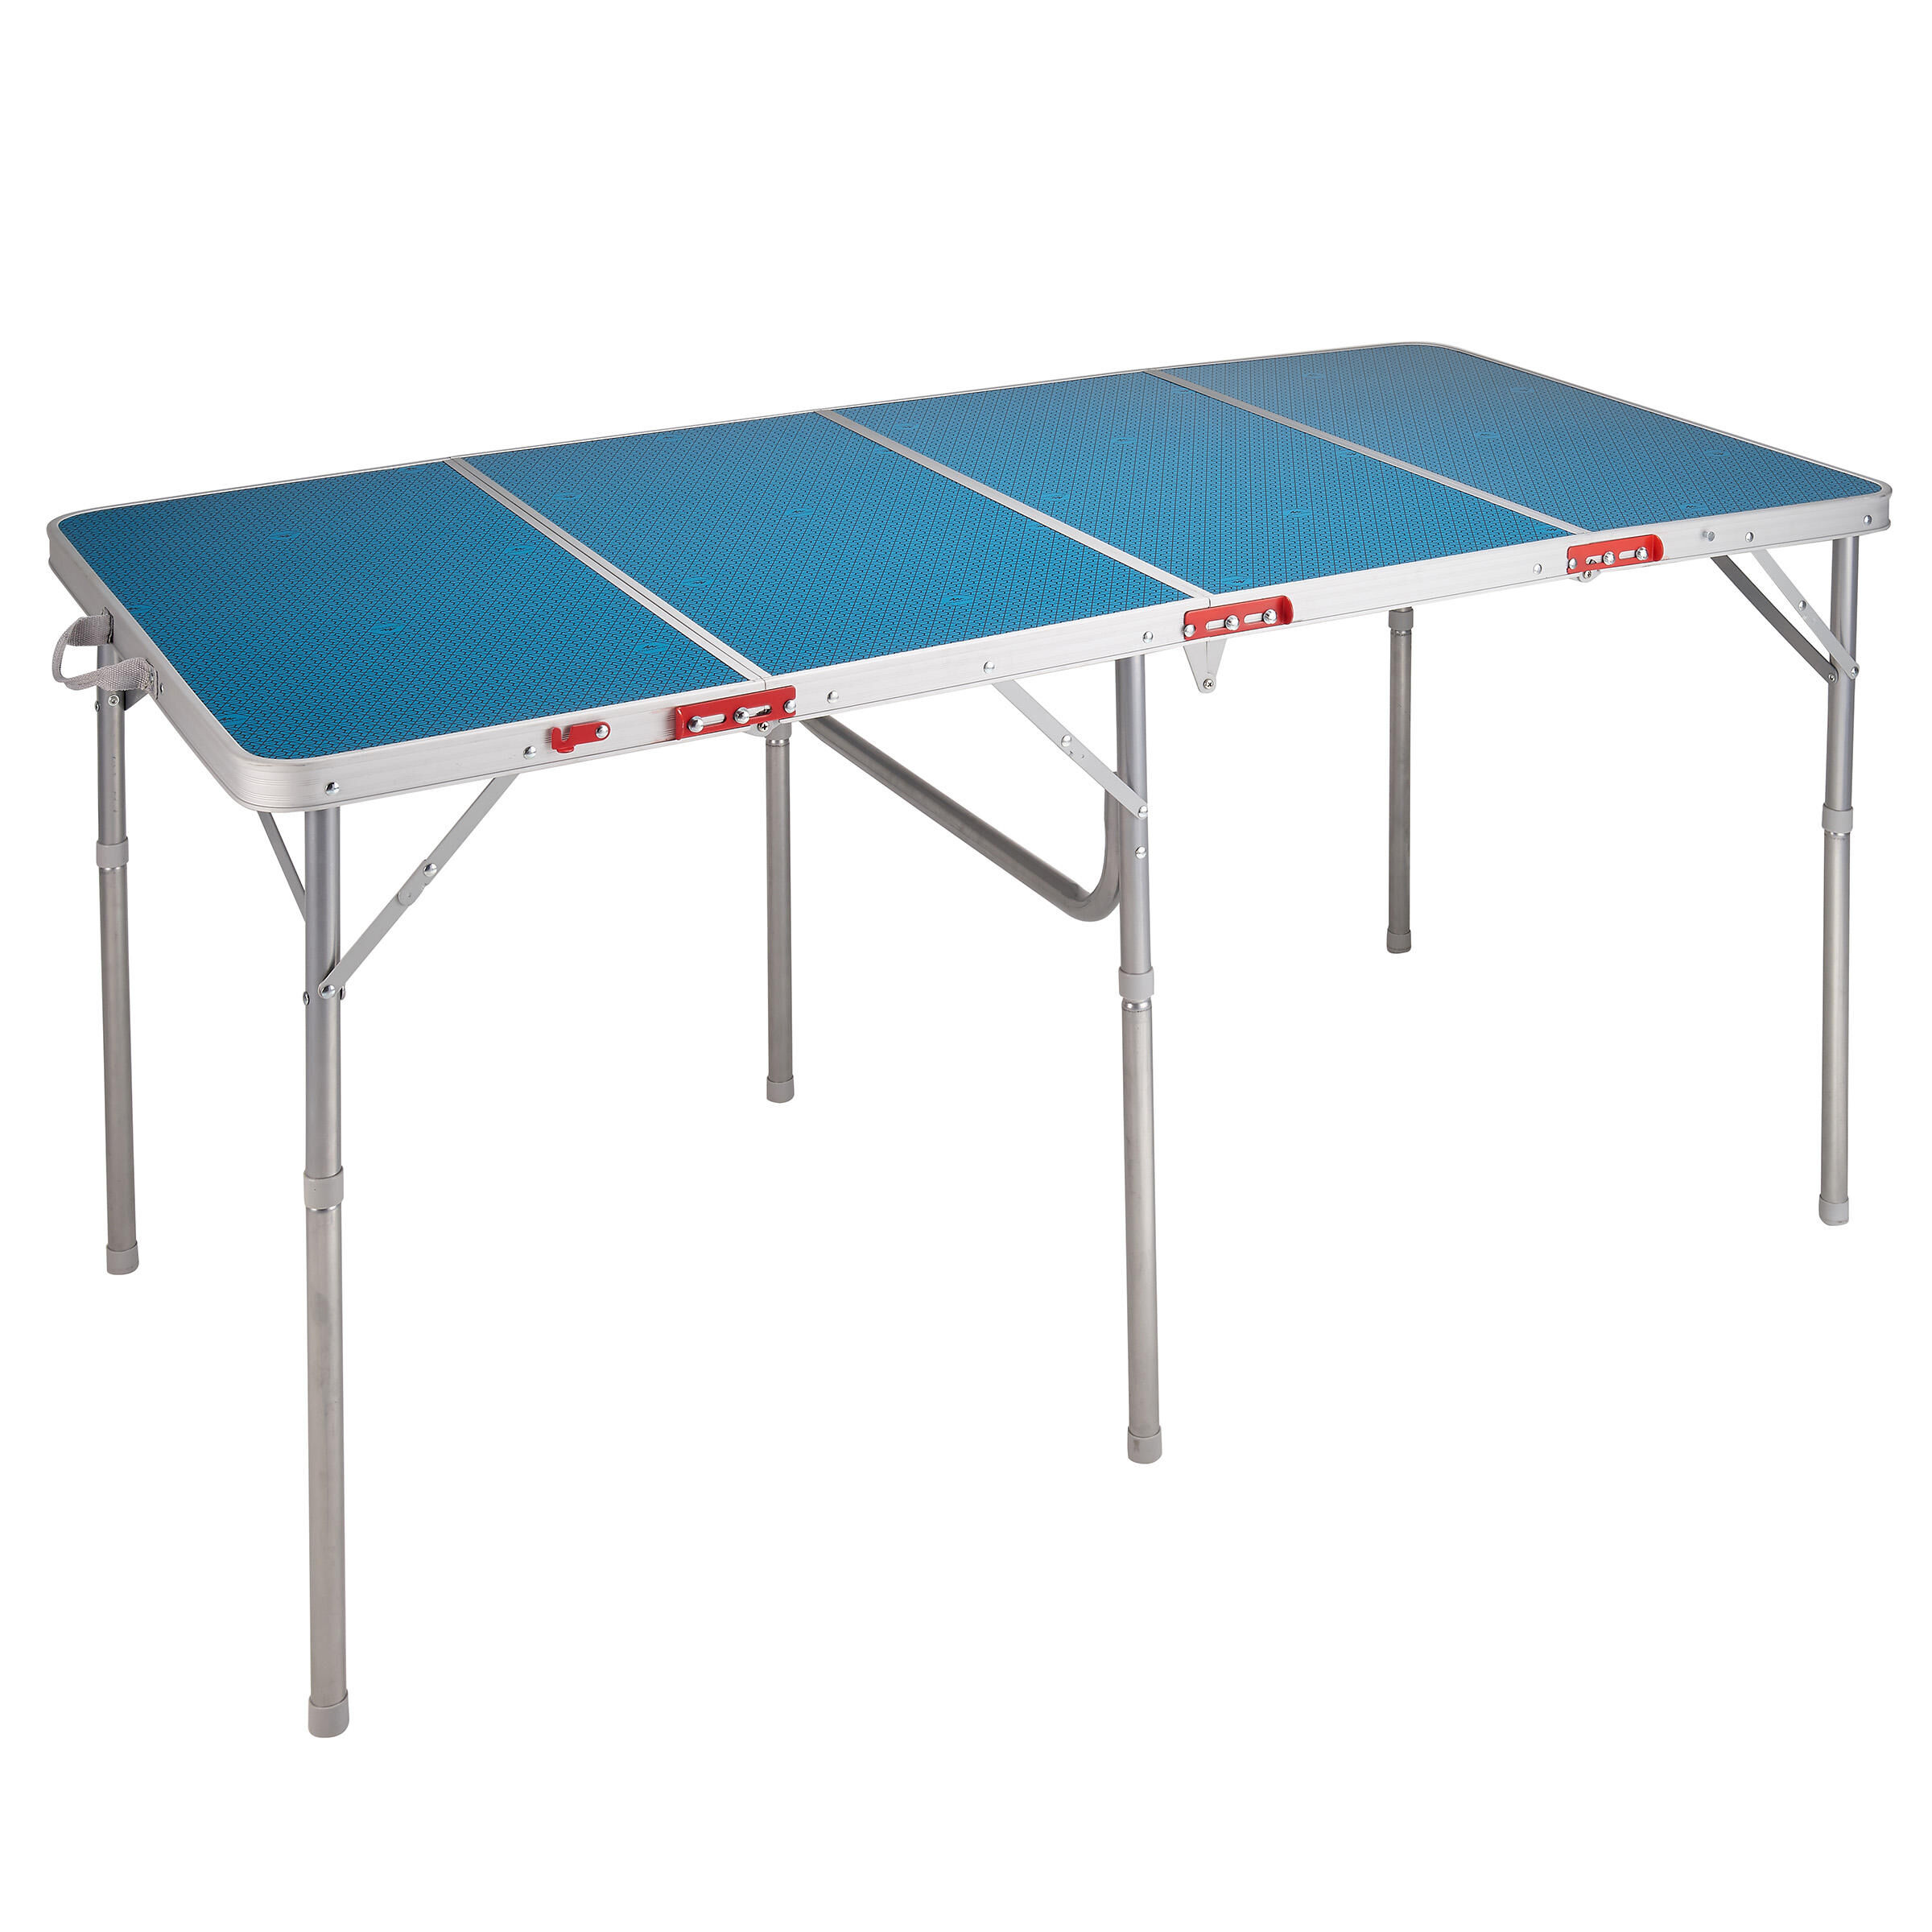 QUECHUA LARGE FOLDING CAMPING TABLE FOR 6 TO 8 PEOPLE